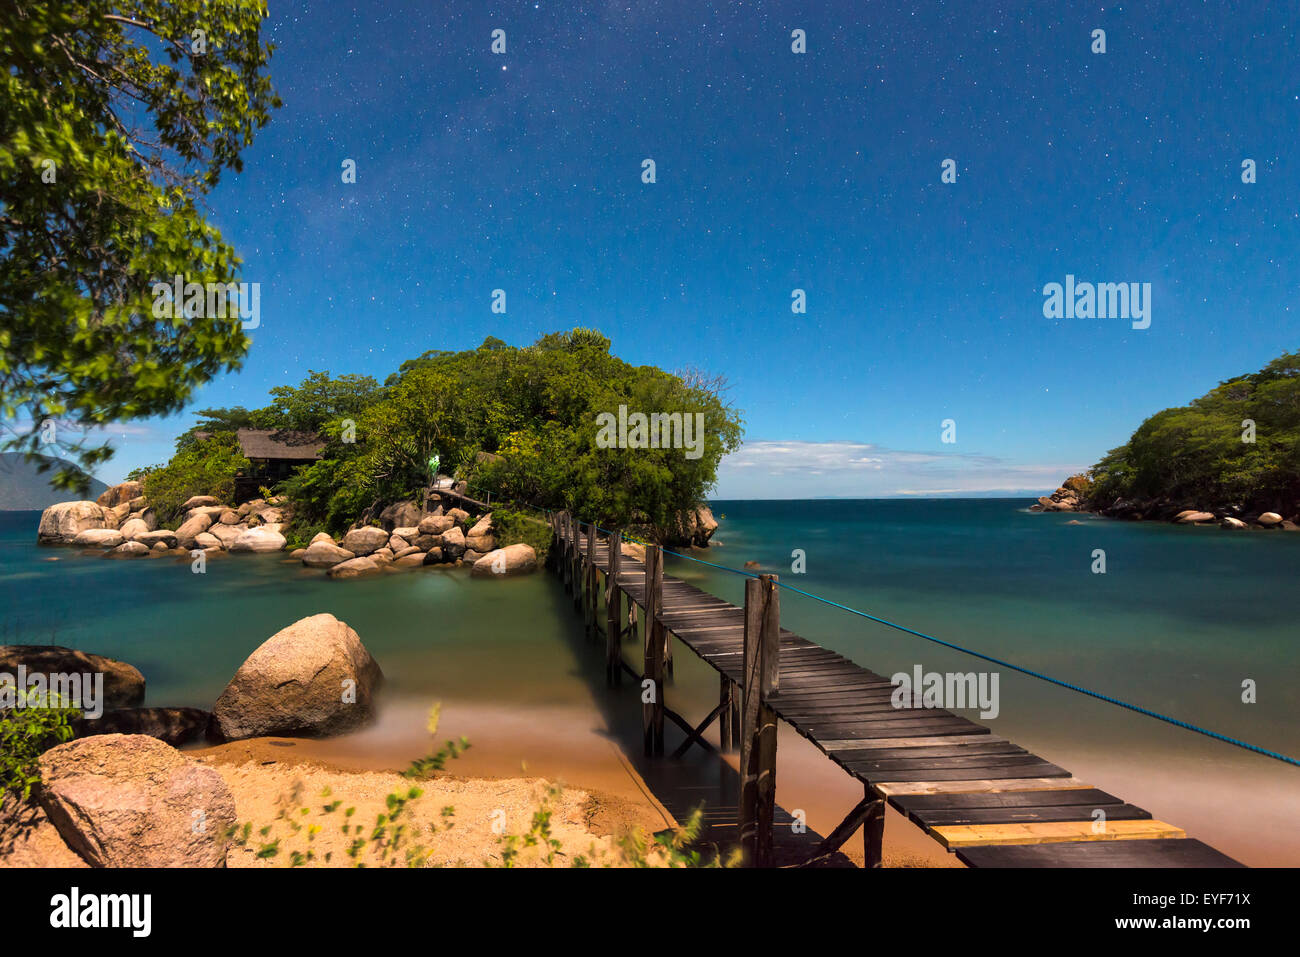 Small bridge going from Mumbo Island to small island for tourist's accommodation under a starry sky, Lake Malawi; Malawi Stock Photo